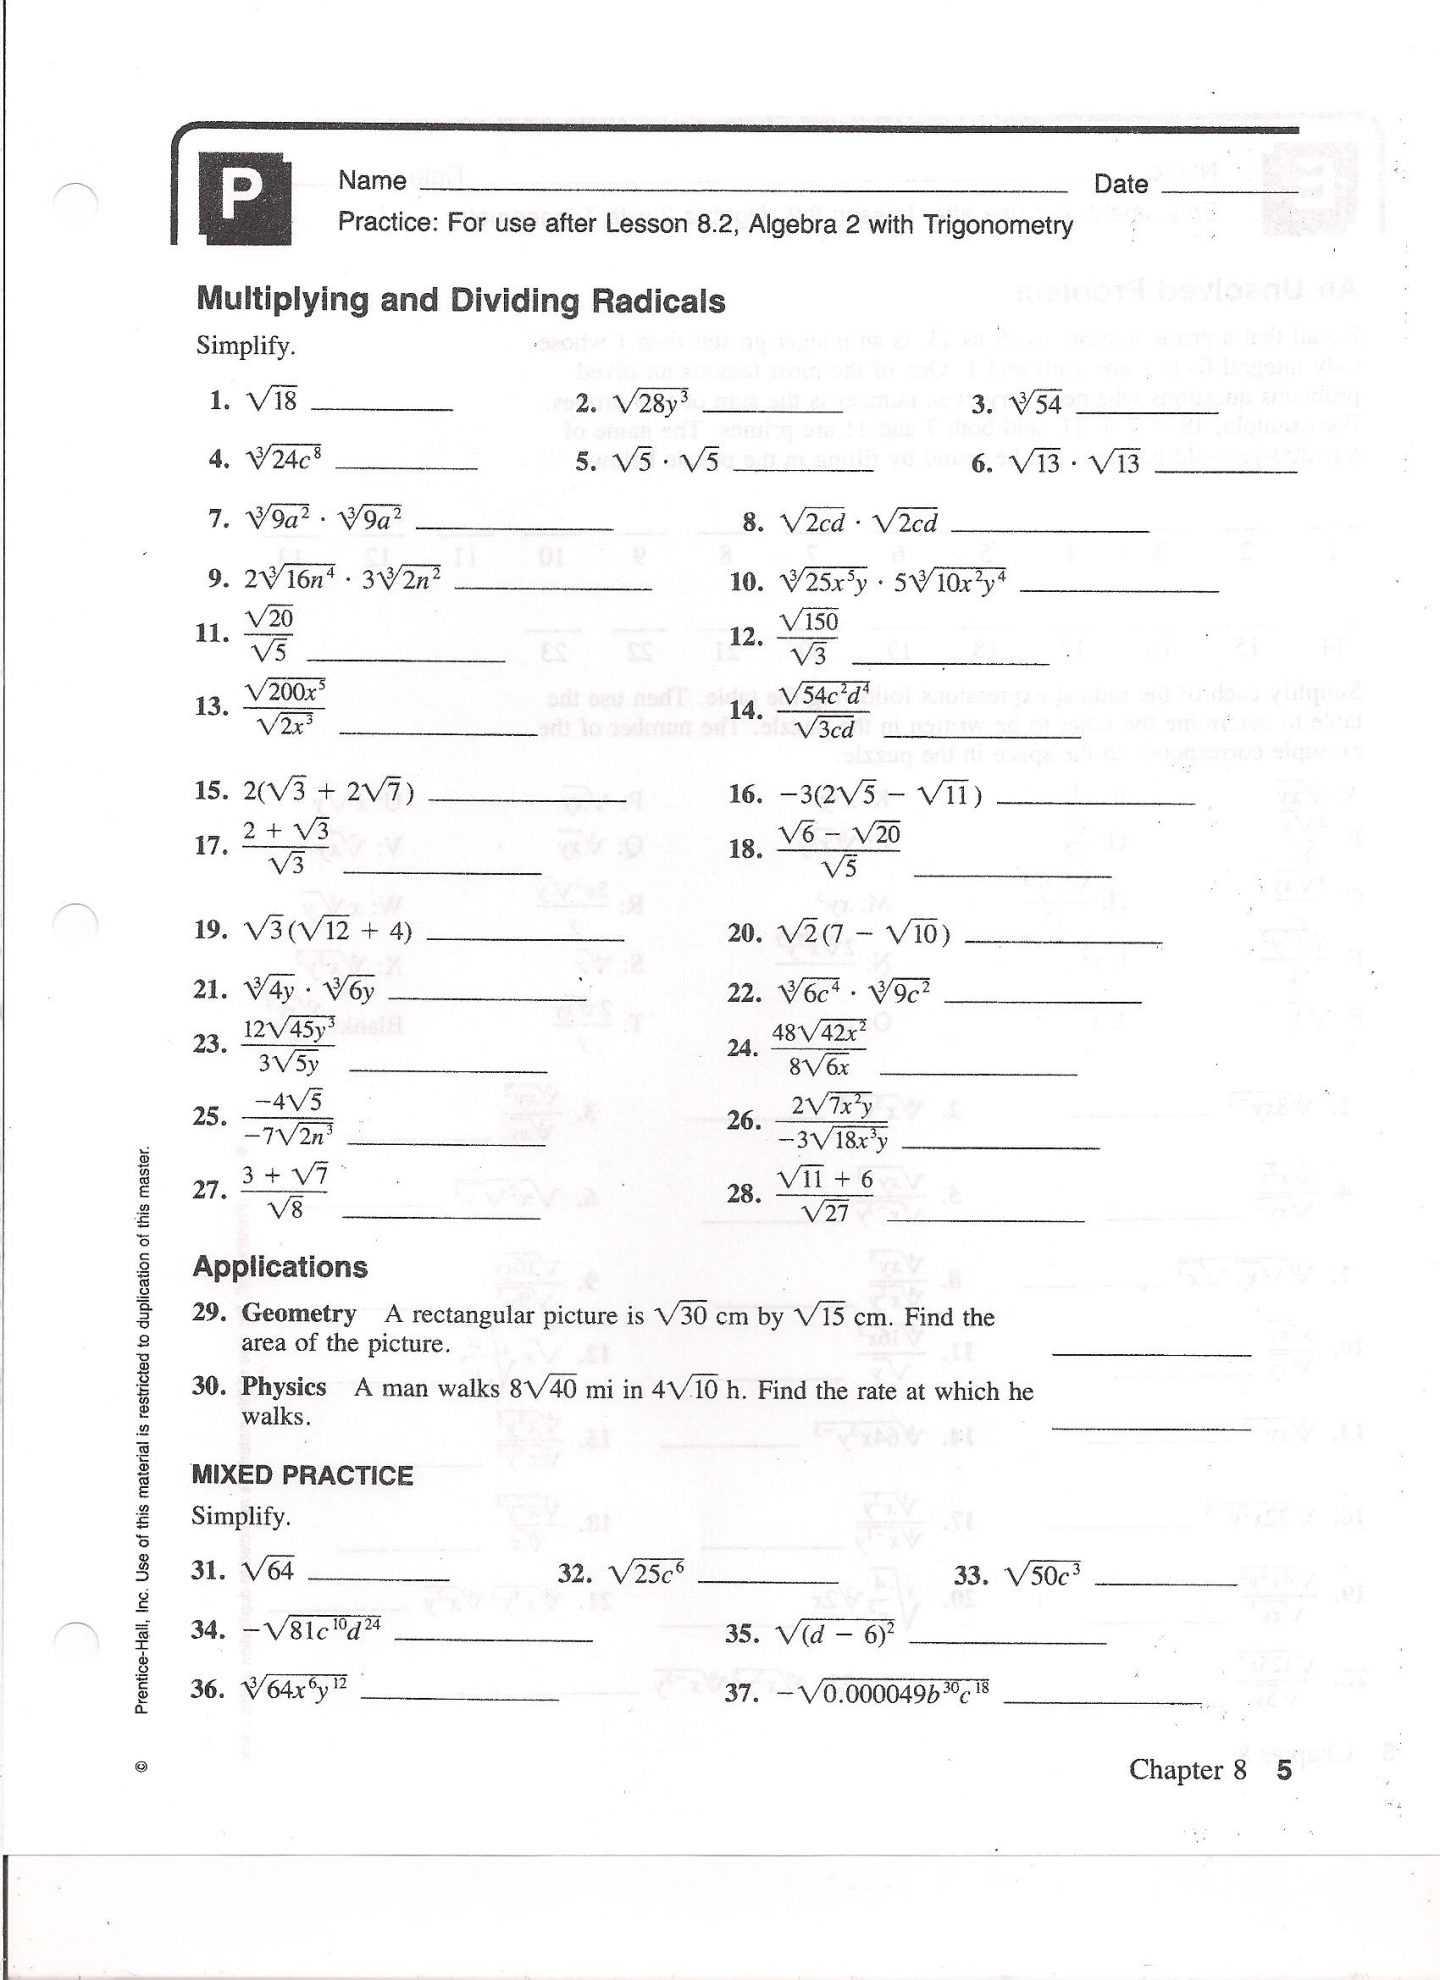 Radicals and Rational Exponents Worksheet Answers Along with Simplifying Rational Expressions Worksheet with Answers